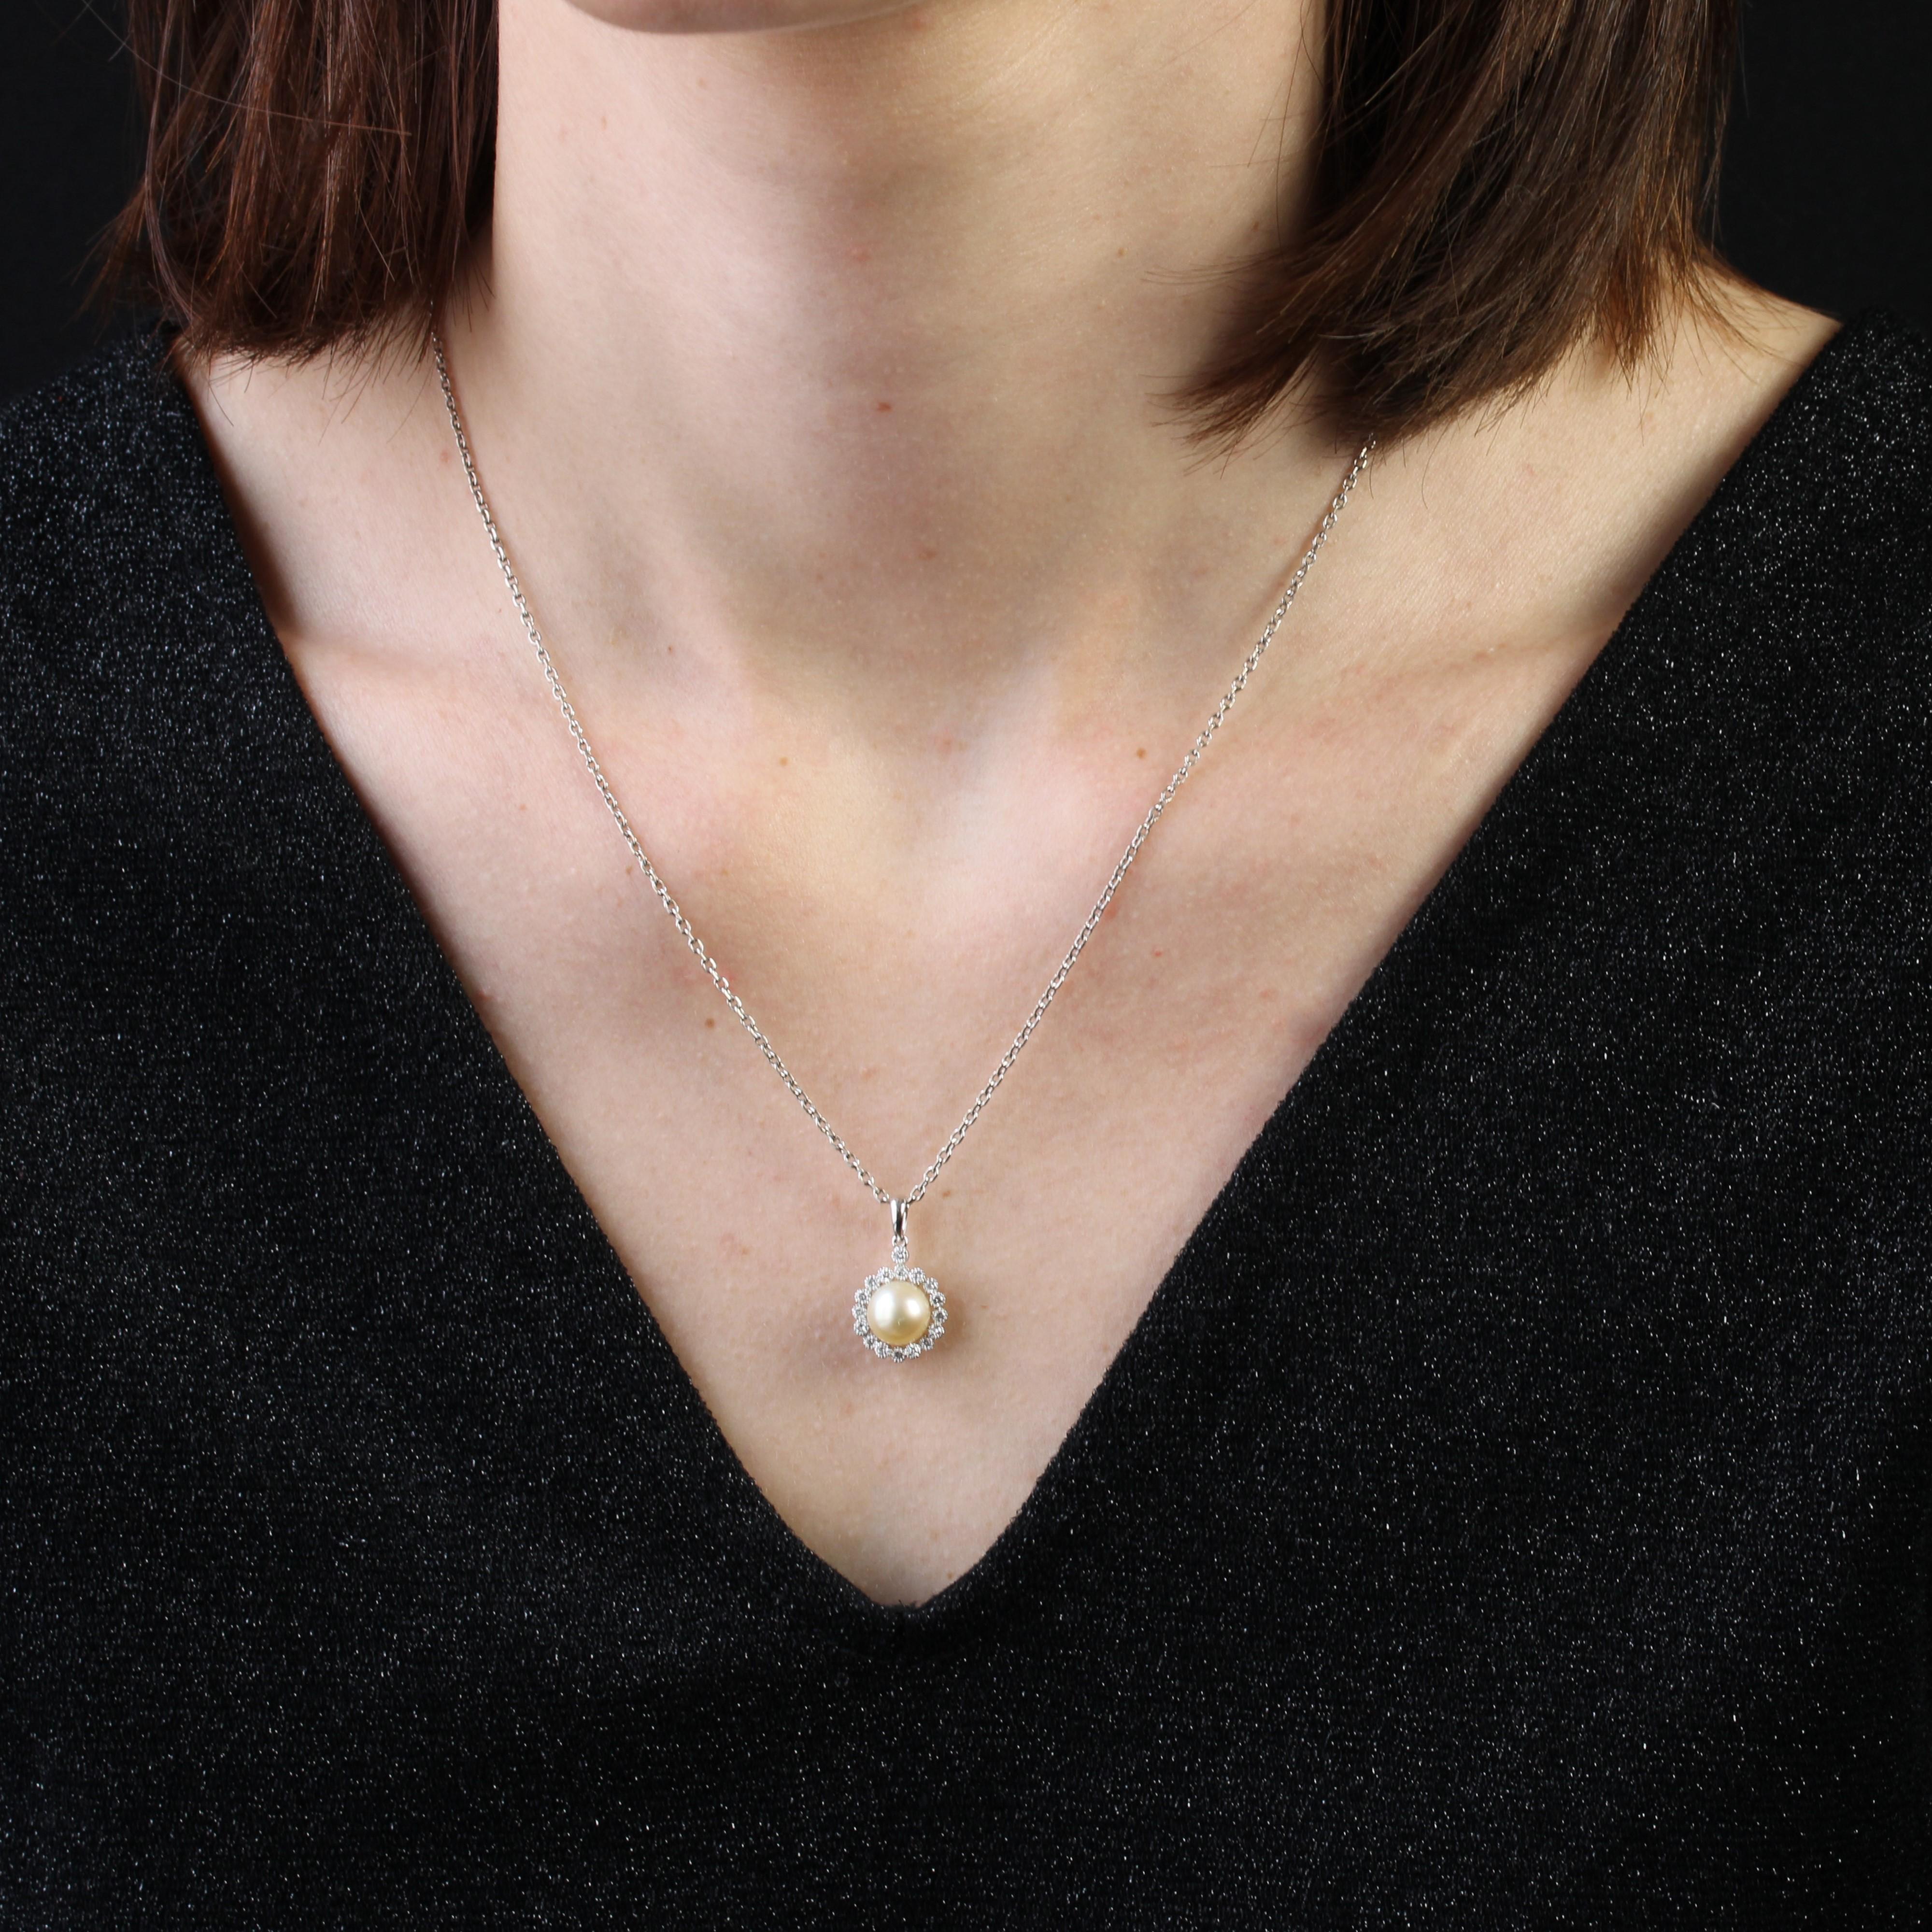 Pendant in 18 karat white gold.
This charming pendant features a central Akoya cultured pearl with a golden and pearly orient, surrounded by millegrain-set modern brilliant-cut diamonds.
Total weight of the diamonds : 0.24 carat